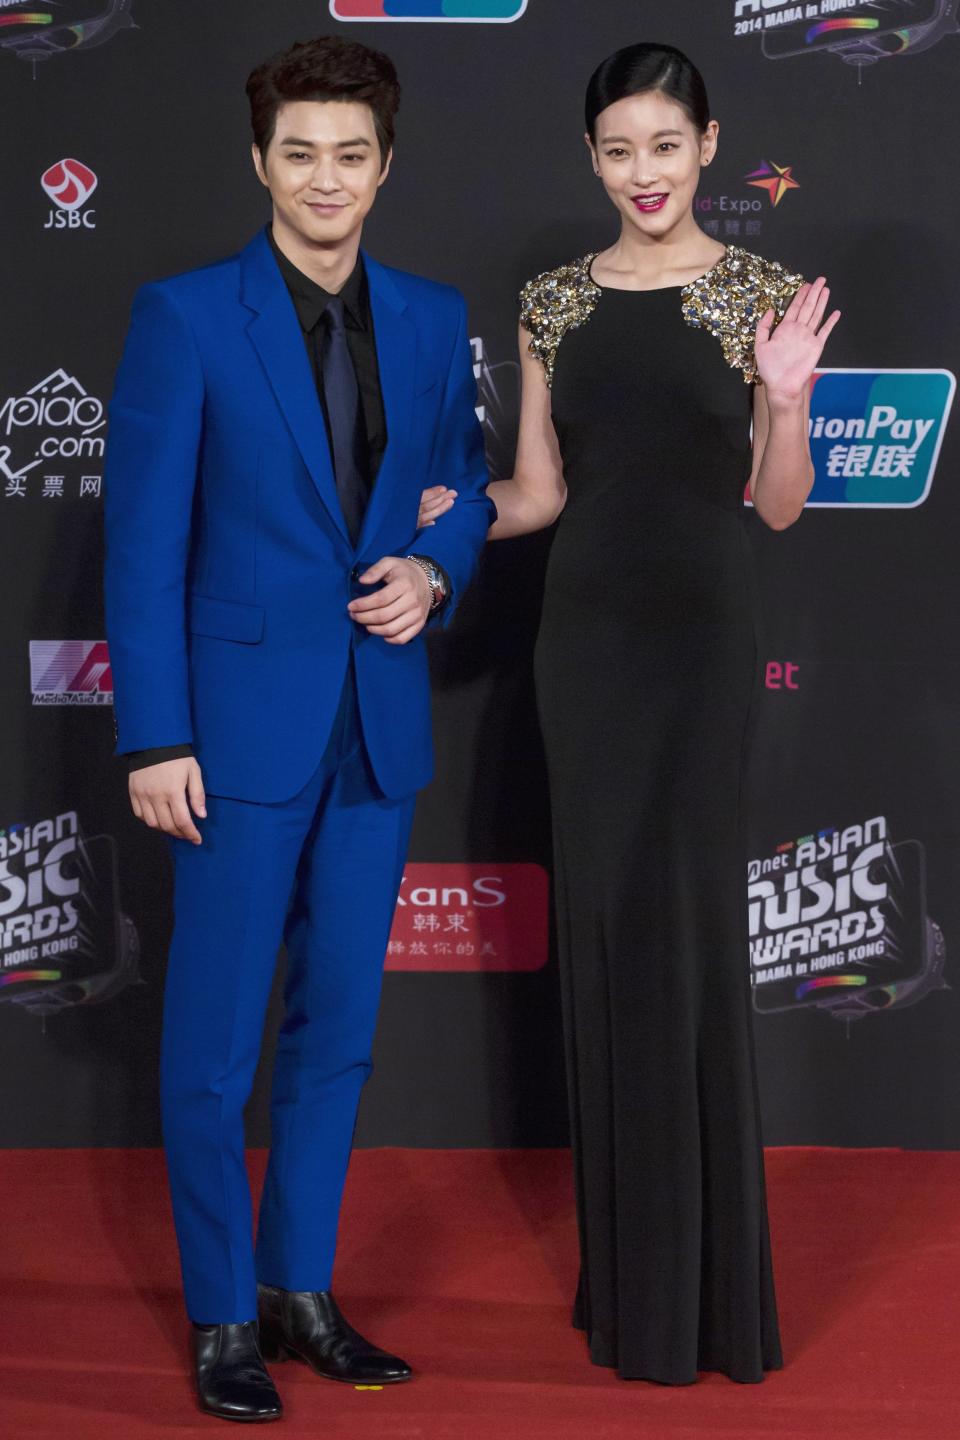 South Korean actors Kim Ji-hoon and Oh Yeon-seo pose on the red carpet as they attend the 2014 Mnet Asian Music Awards (MAMA) in Hong Kong